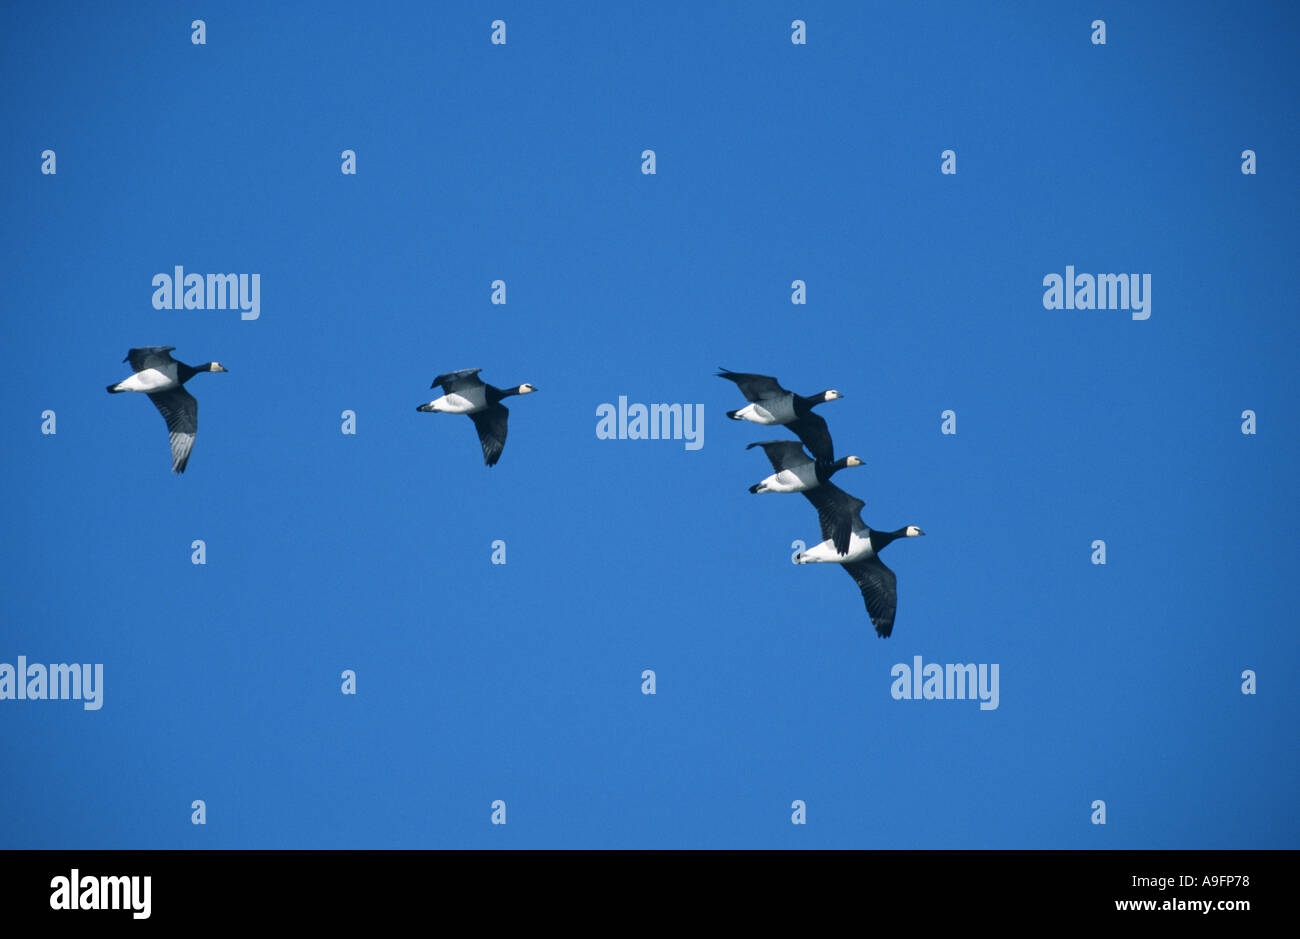 barnacle goose (Branta leucopsis), five animals flying in formation, Germany, Schleswig-Holstein, NP Schleswig-Holsteinisches W Stock Photo